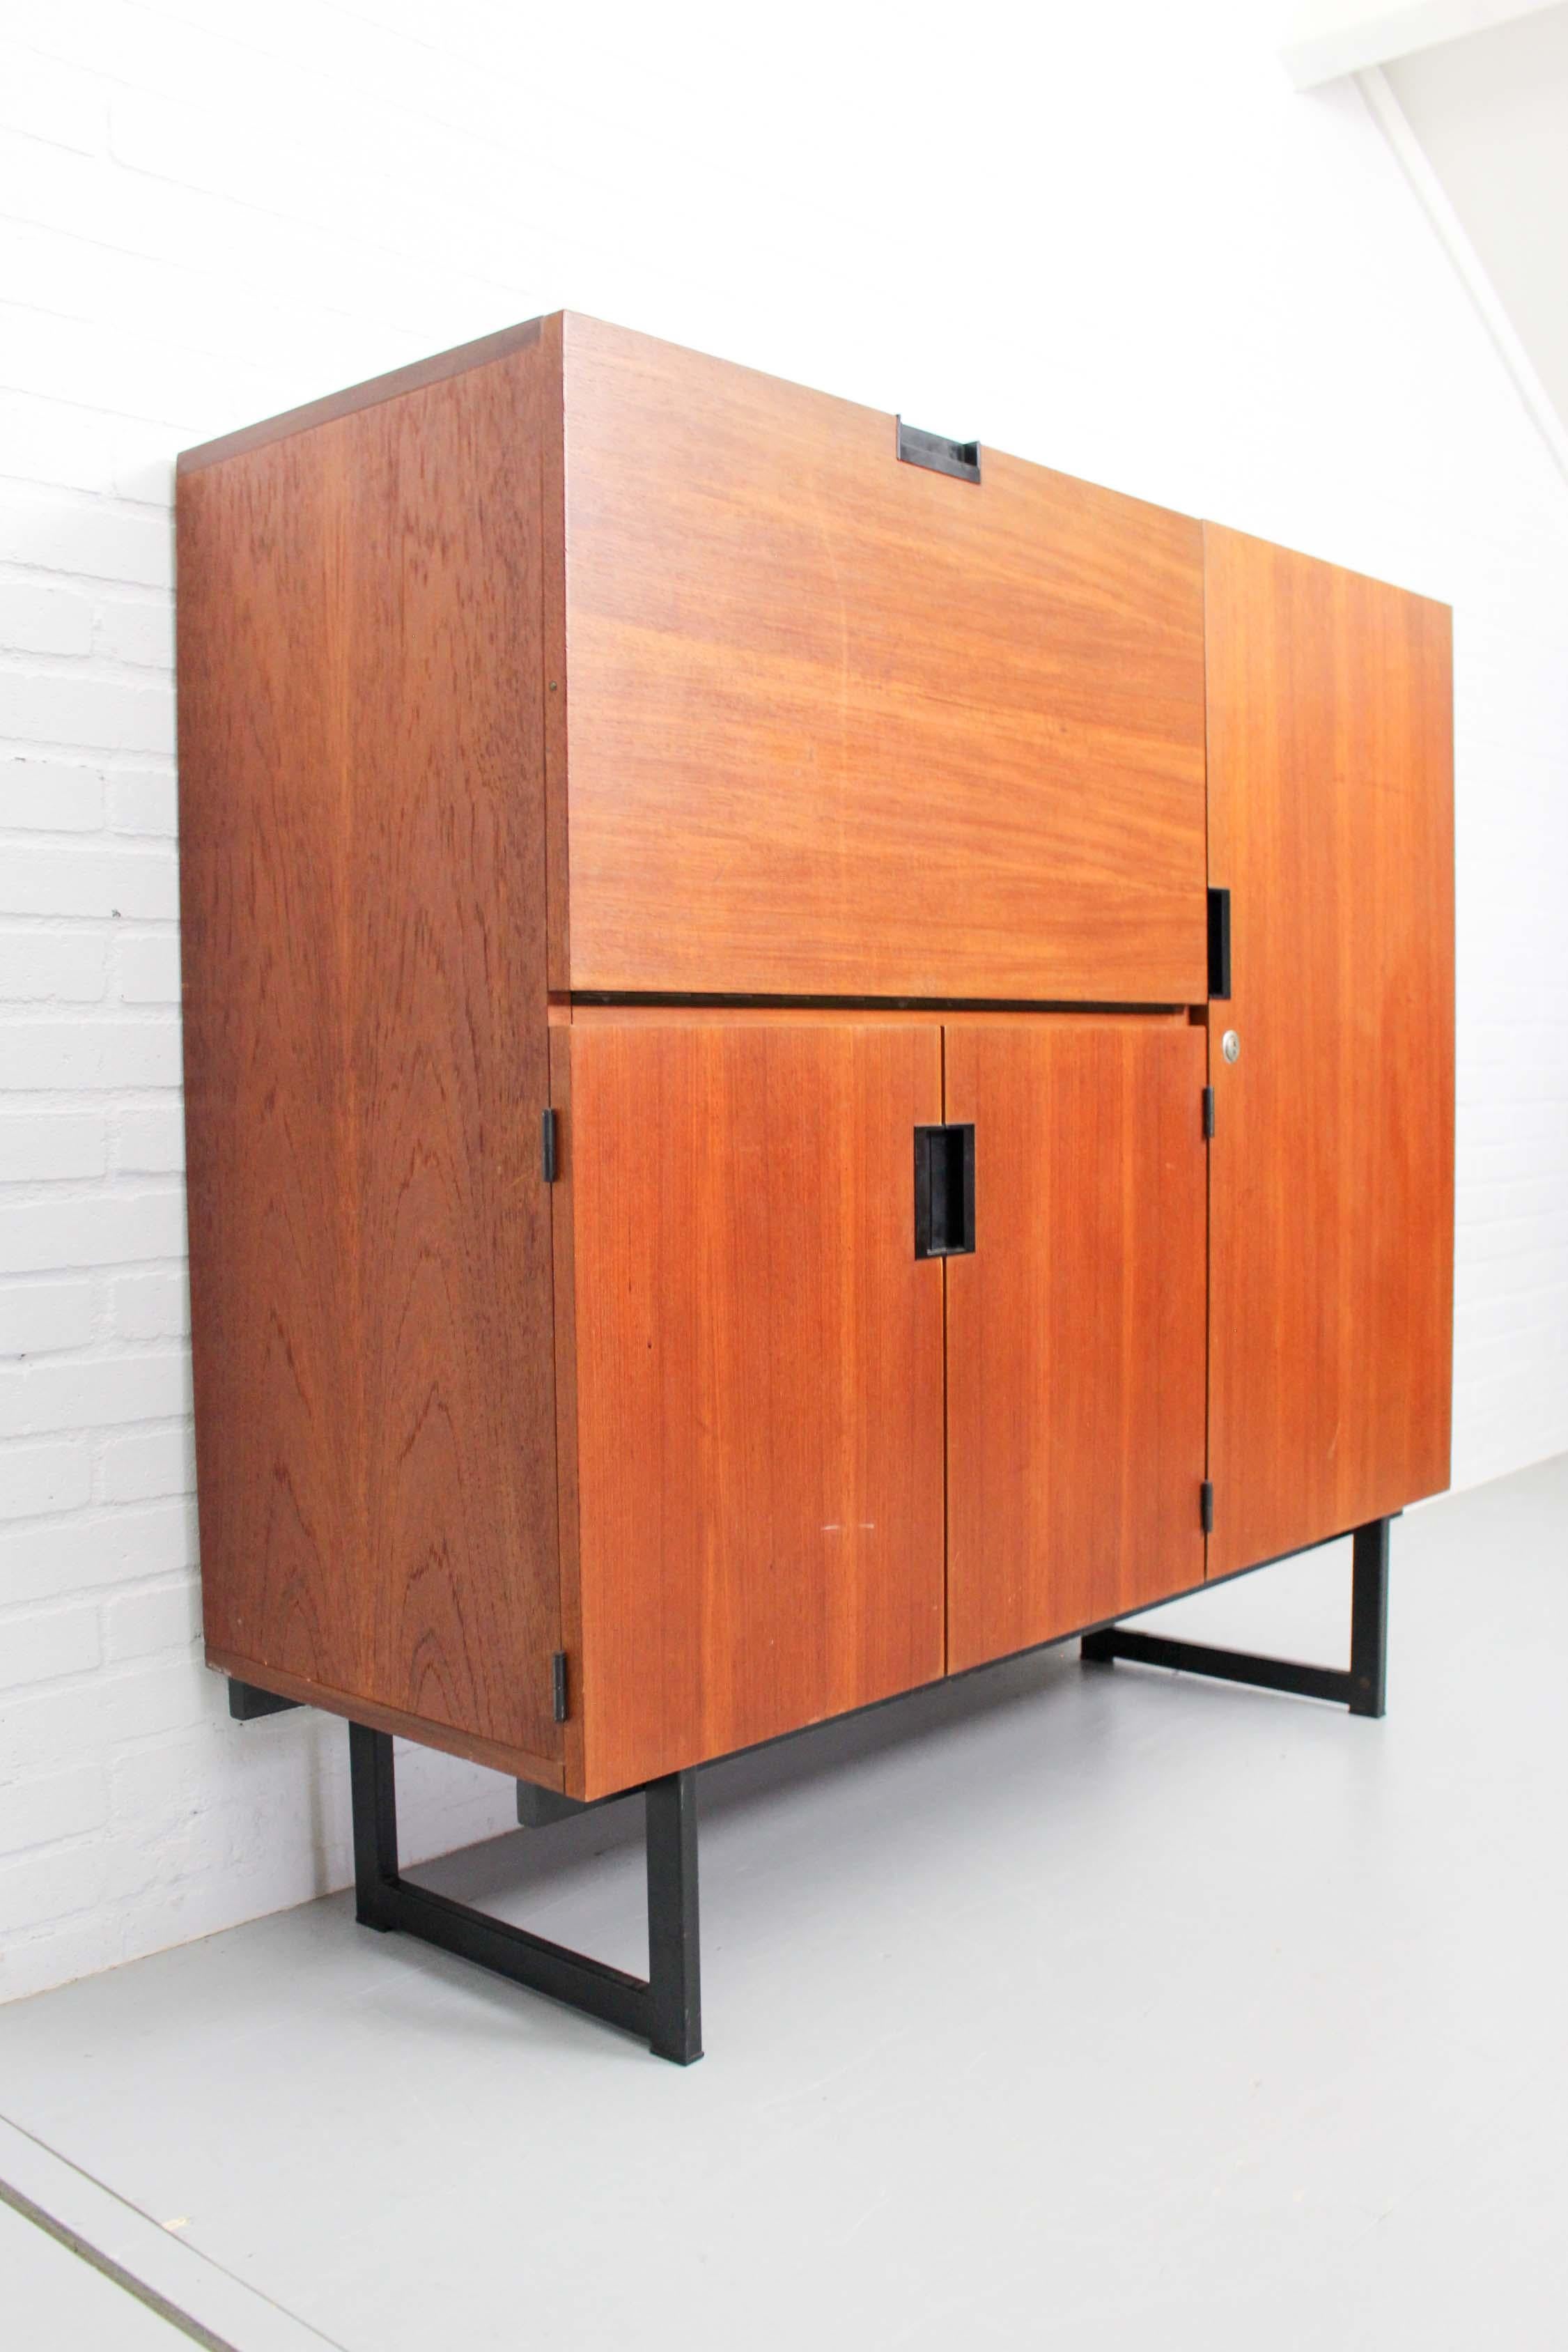 Dutch vintage design cabinet CU01 designed by Cees Braakman for Pastoe, 1958. This design from the Japanese series is one of the top pieces from Pastoe's history. The warm teak and the minimalist metal frame give it a modern look. The secretaire is